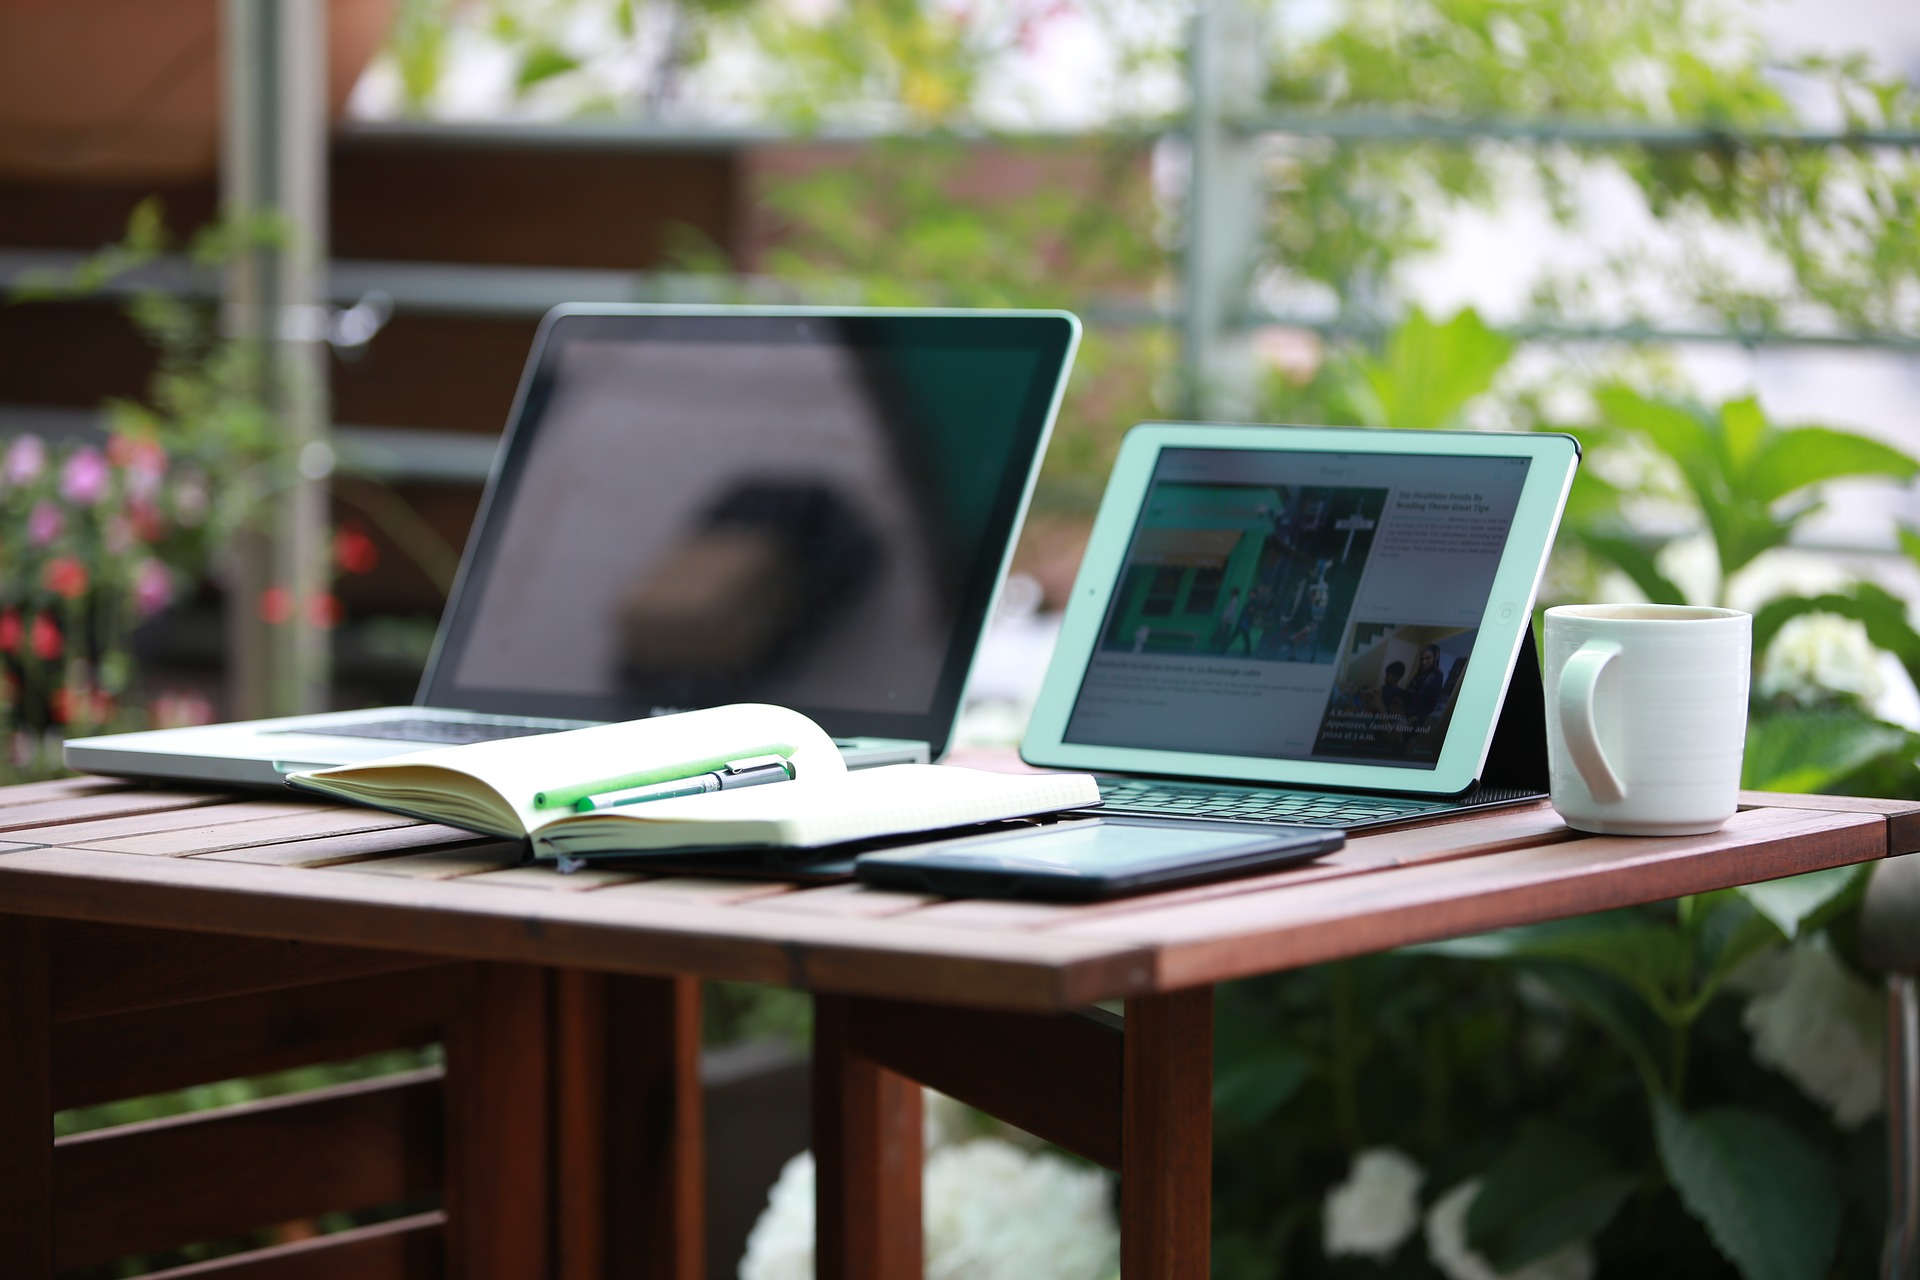 Laptop, tablet, mobile device, and notebook on a desk.